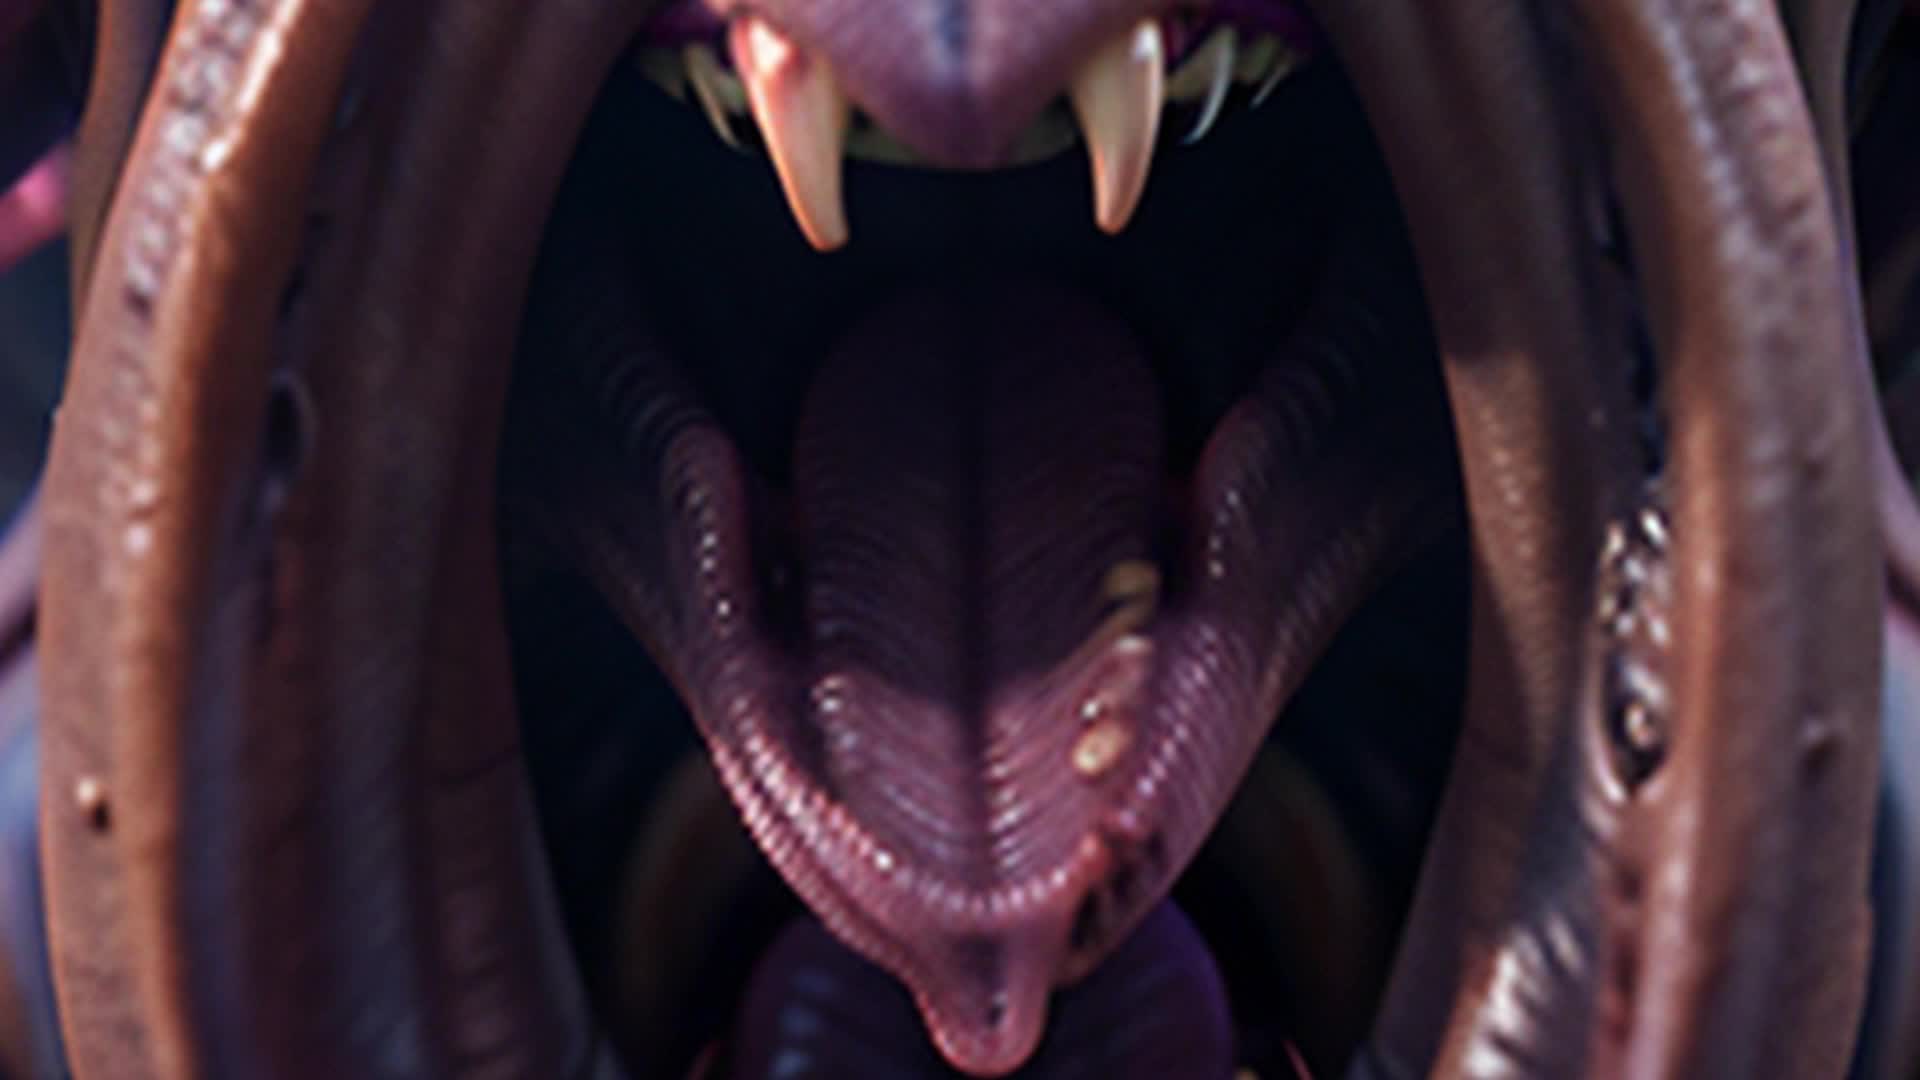 Up close view of Cthulhu mouth tentacles, hyper realistic, 8k pinks